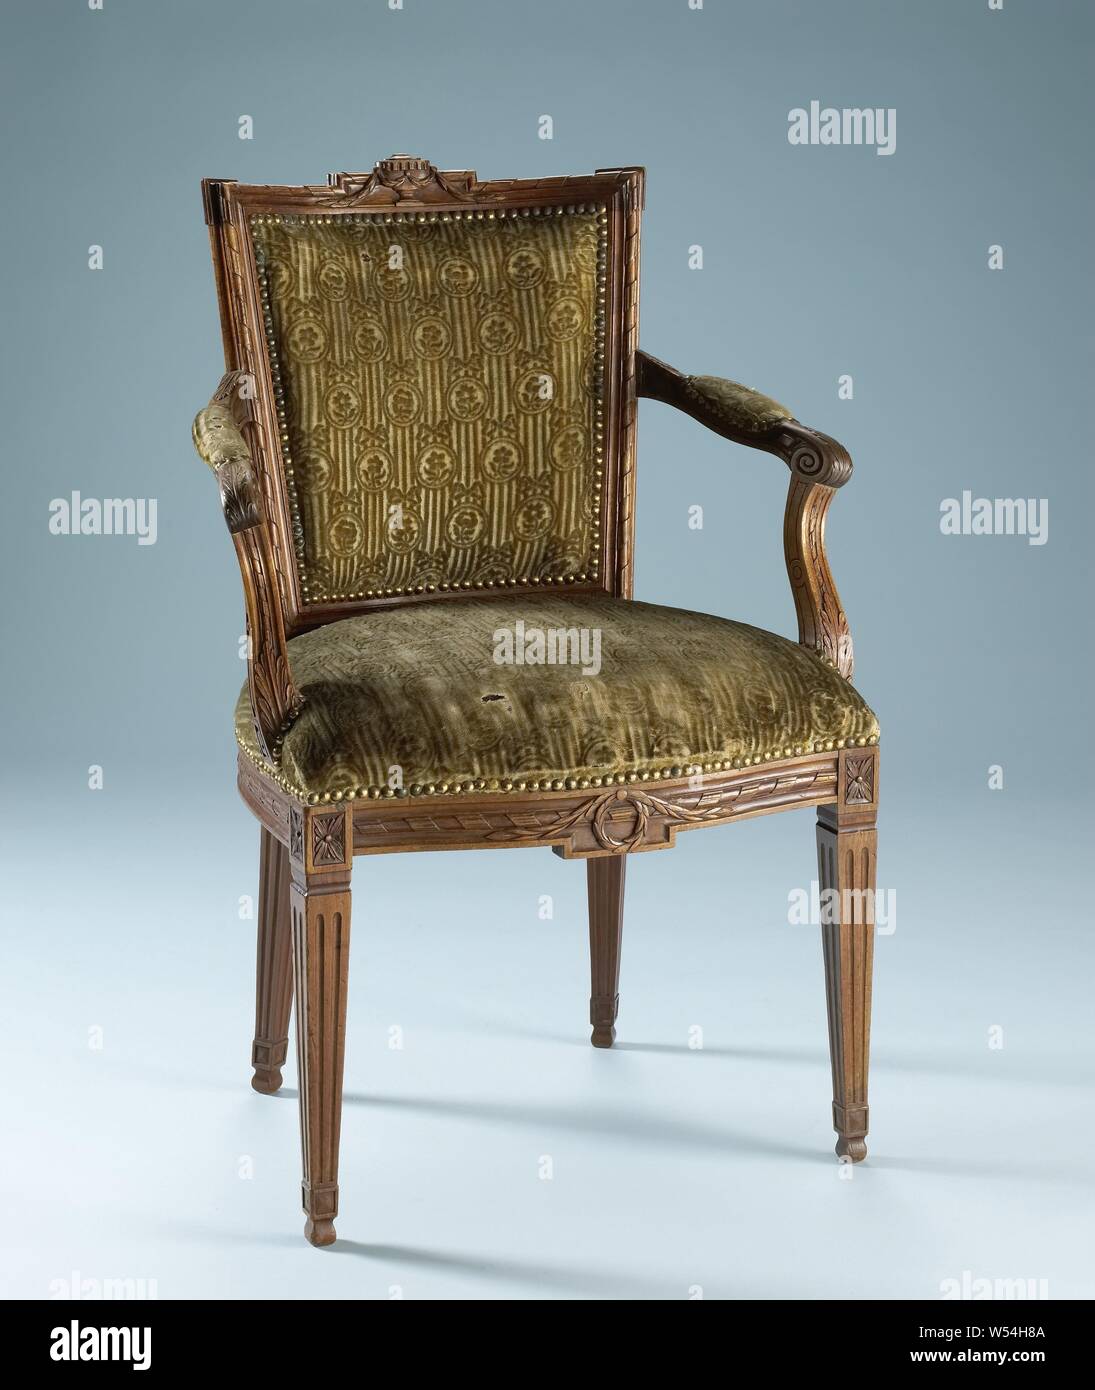 Chair of mahogany, covered with string with a continuous pattern of oval hanging flowers in which a flower on striped ground, covered with string with a continuous pattern of oval hanging flowers in which a flower on a striped ground. The square legs are fluted. The front line is decorated in the middle with a laurel wreath and a pendulum. The back frame is parallelogram-shaped and concave. The upper threshold is decorated with a stabbed vase and laurel garland. The cover is attached with nails with gold-plated heads. The chair belongs to an ameublement, anonymous, Northern Netherlands, 1775 Stock Photo